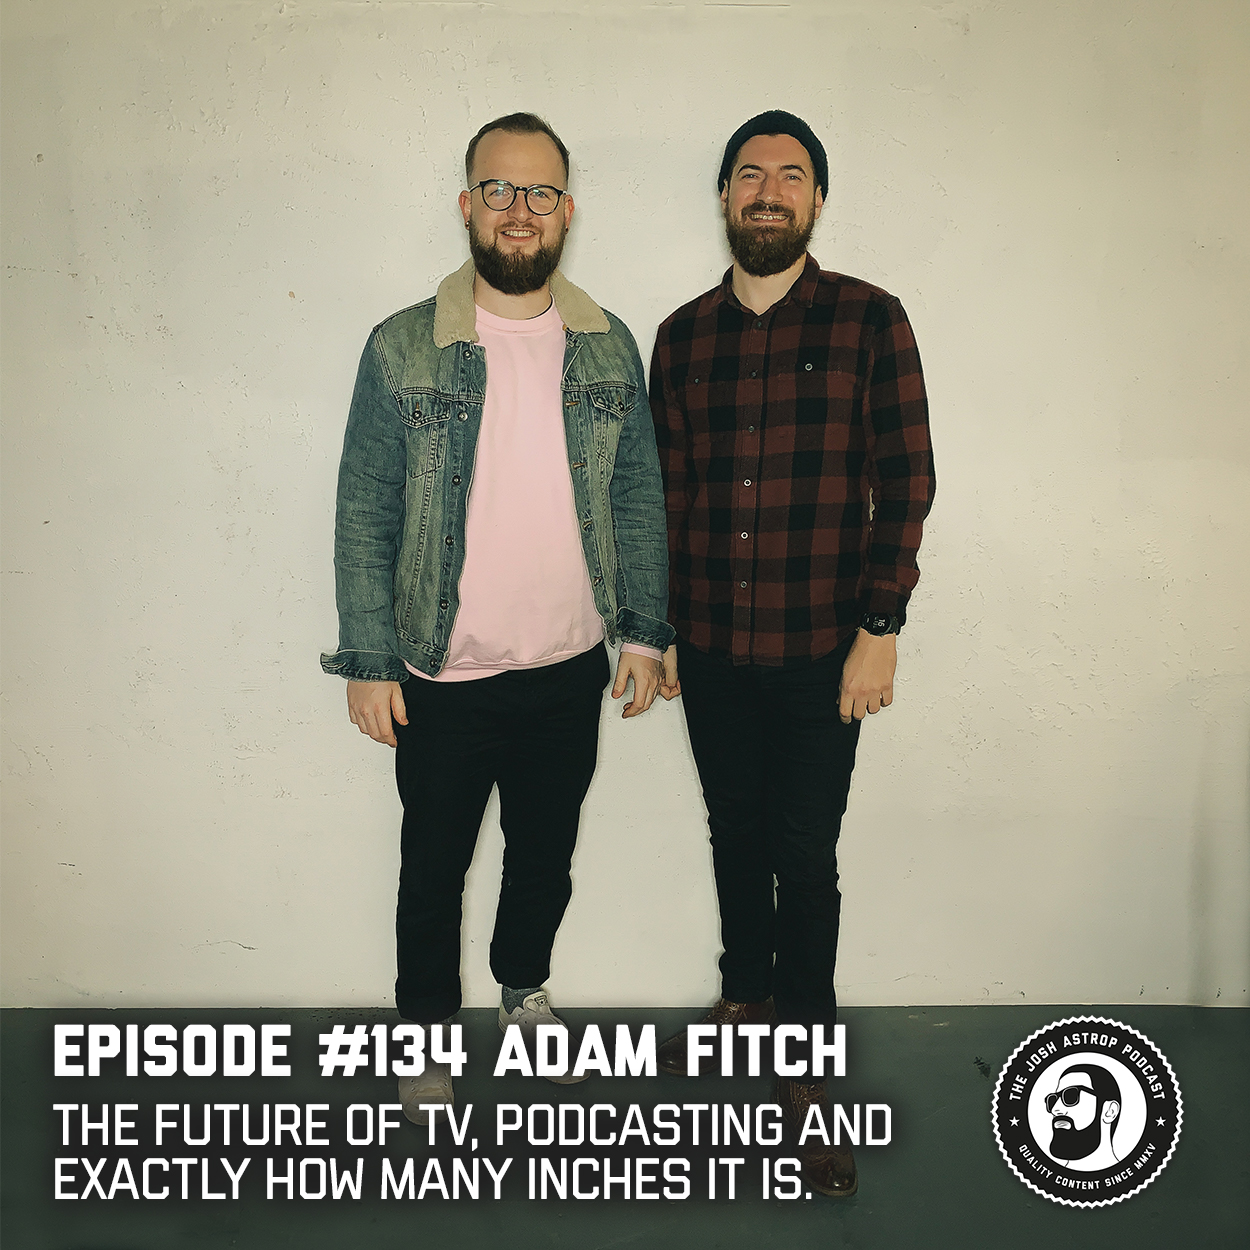 #134 Adam Fitch - The future of TV, podcasting and how many inches IT is.